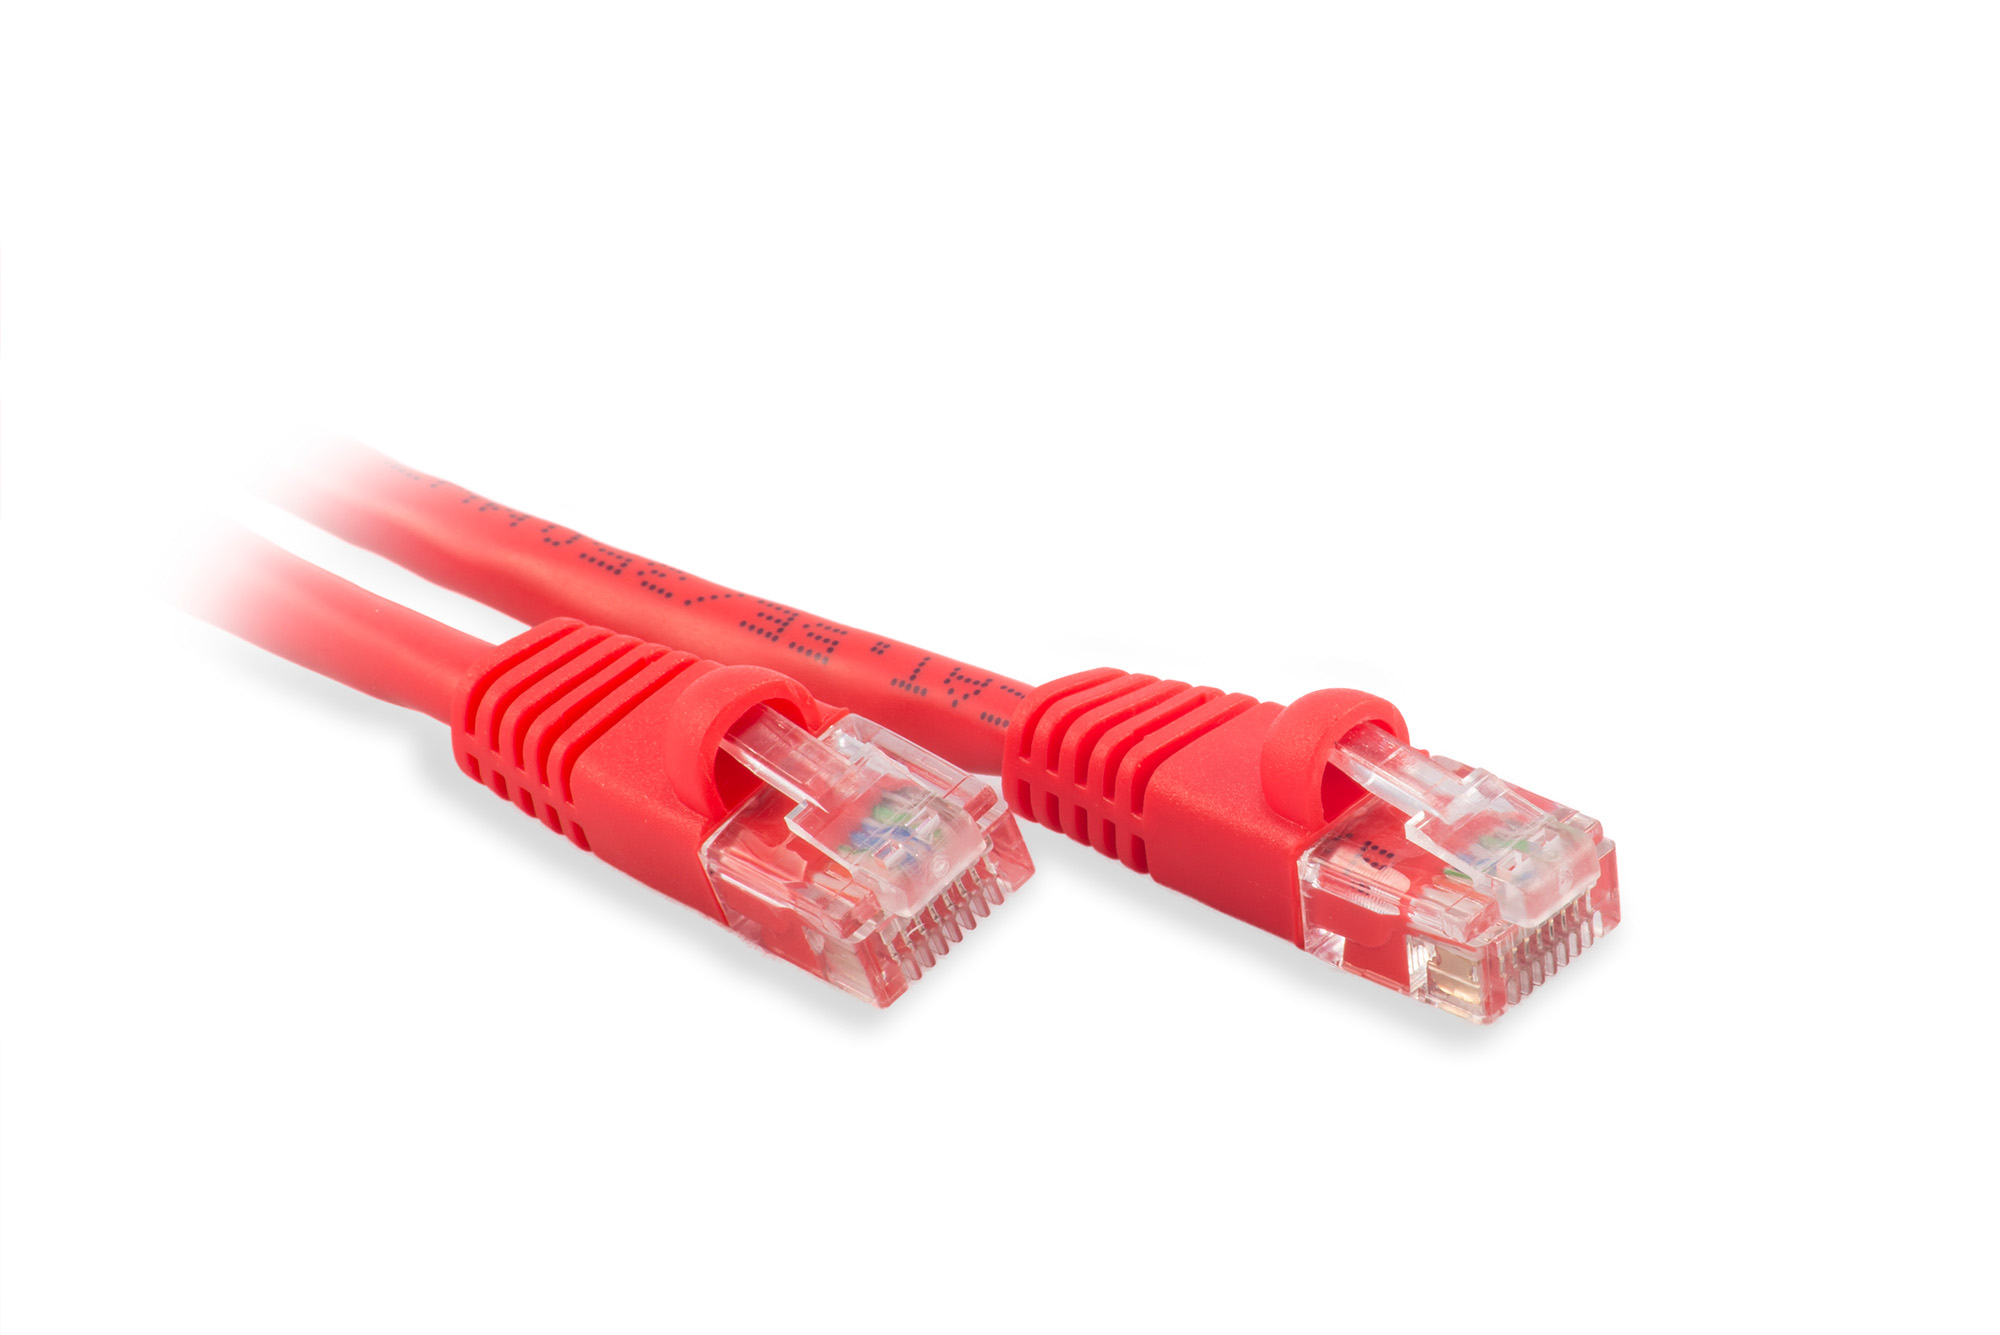 25ft Cat6 Ethernet Patch Cable - Red Color - Snagless Boot, Stranded, RJ45, 550Mhz, 24AWG